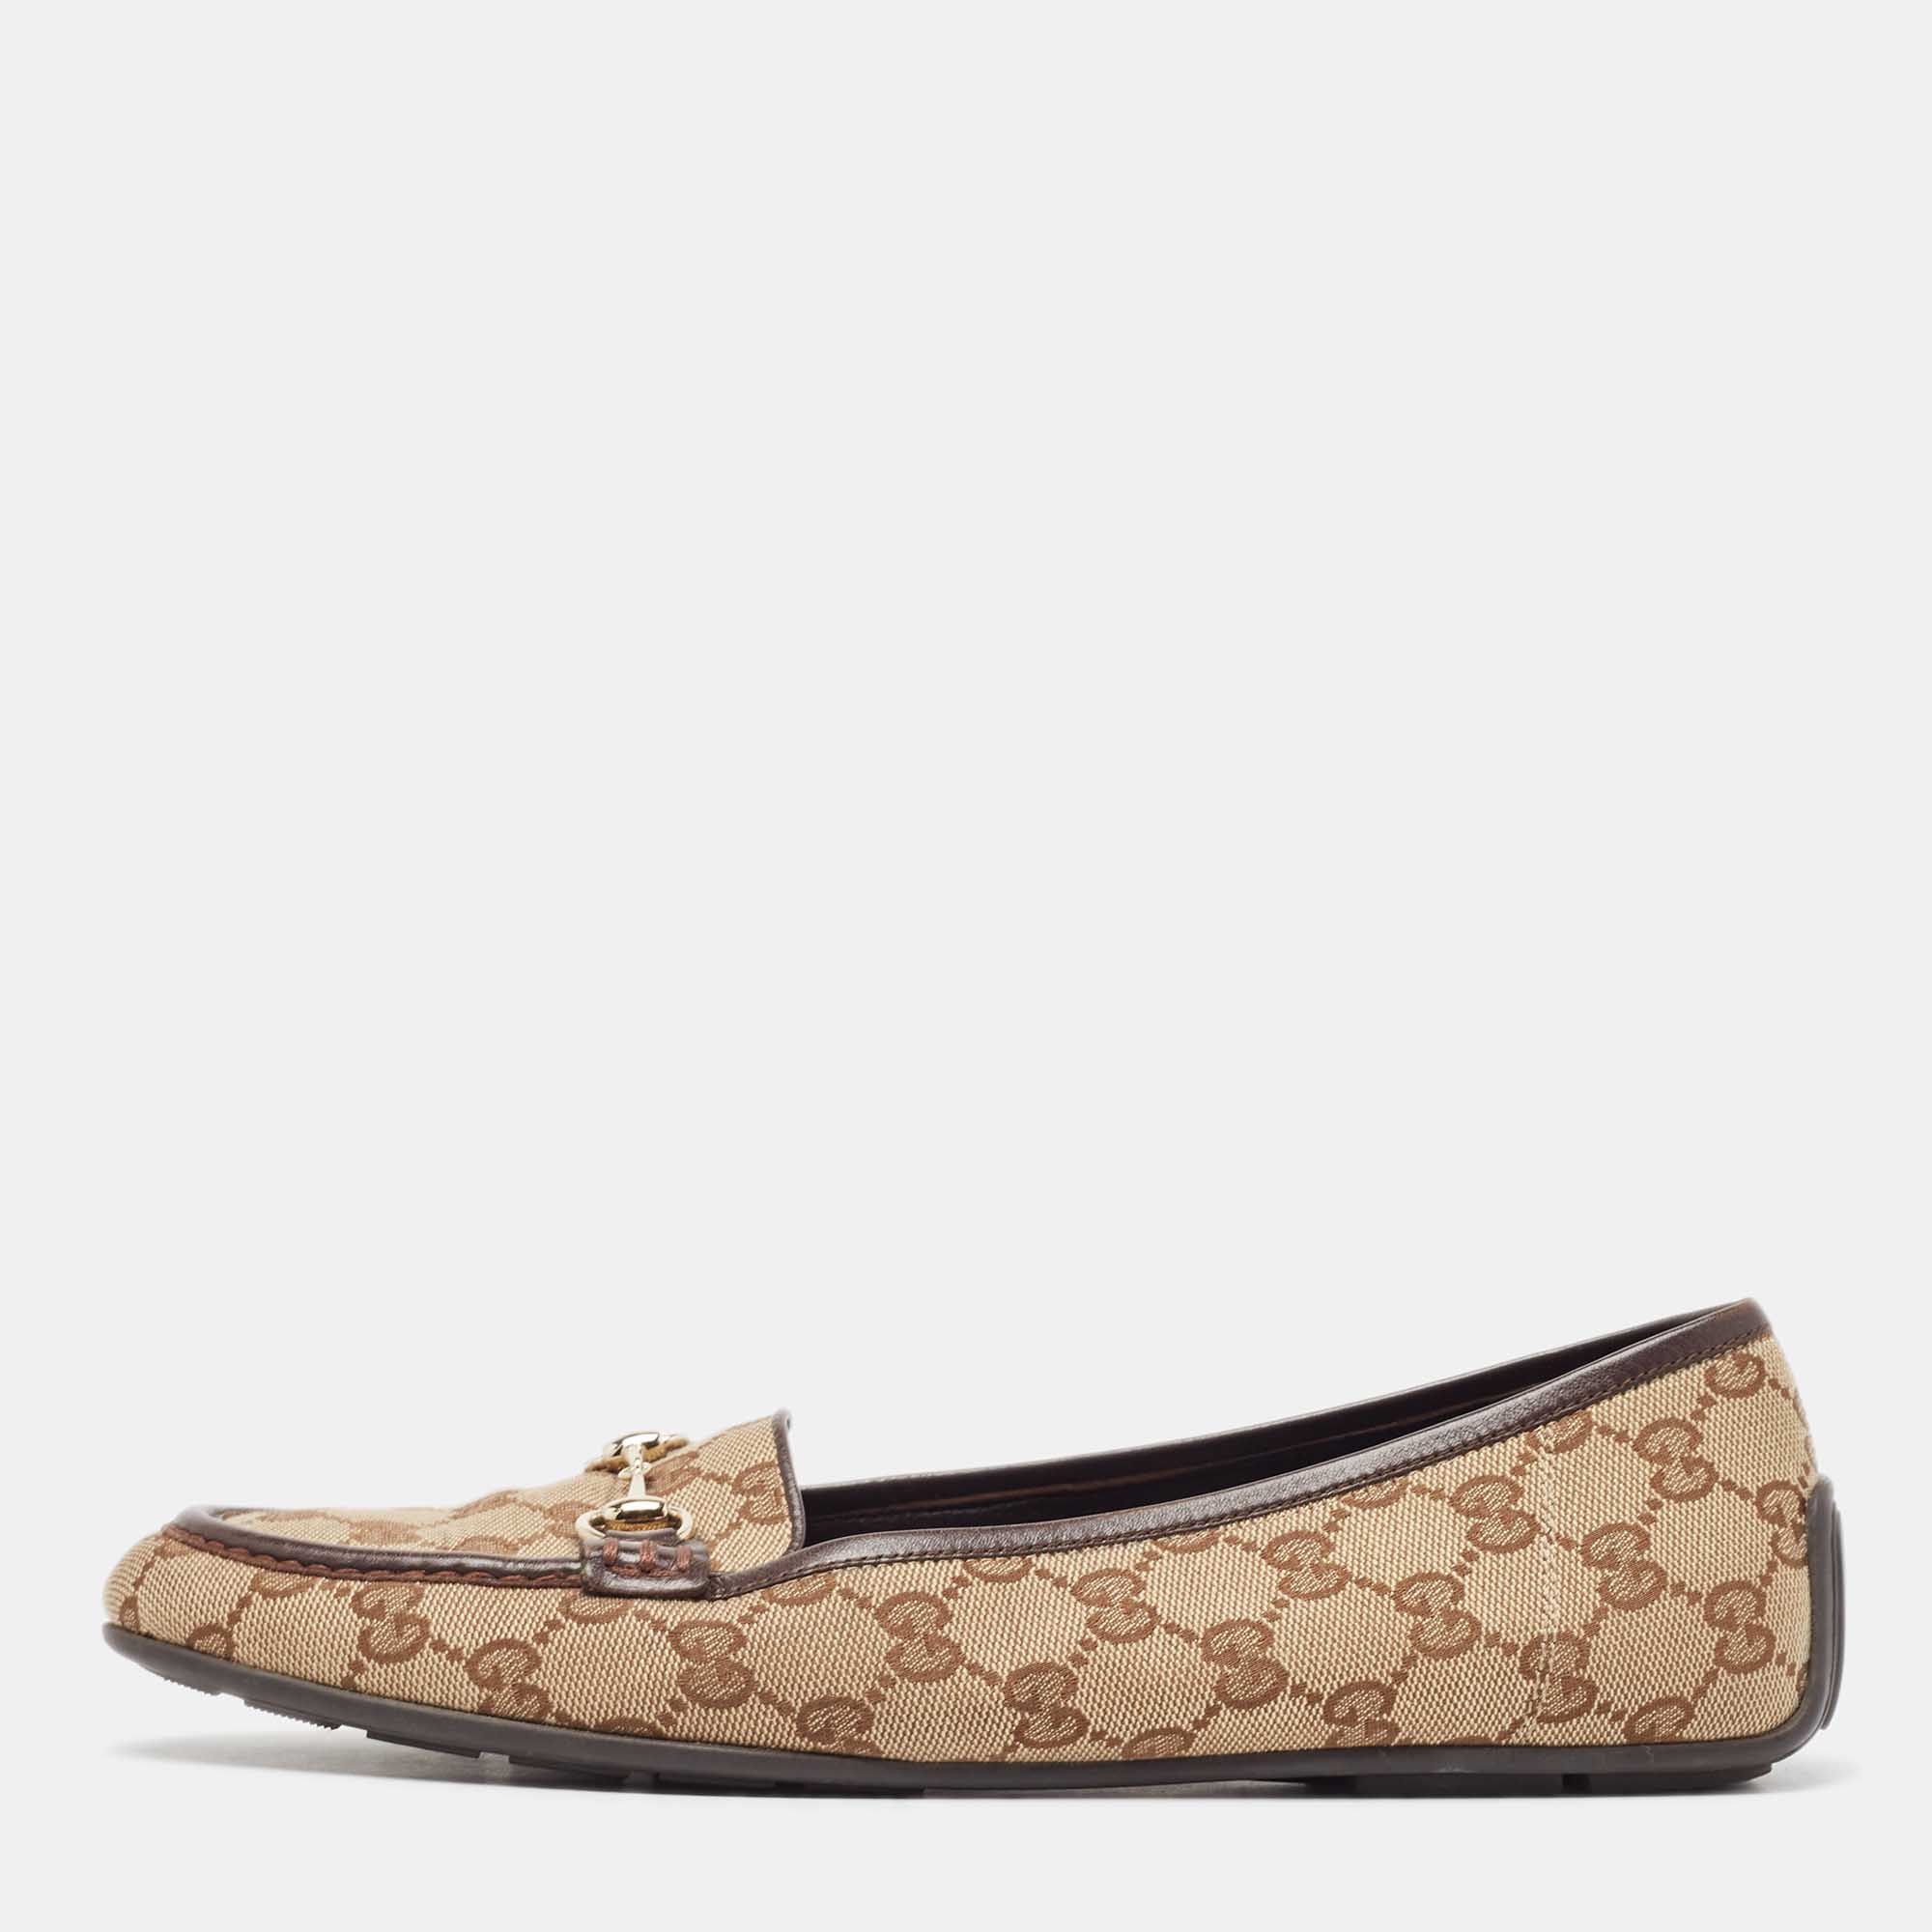 Gucci brown canvas and leather horsebit loafers size 40.5